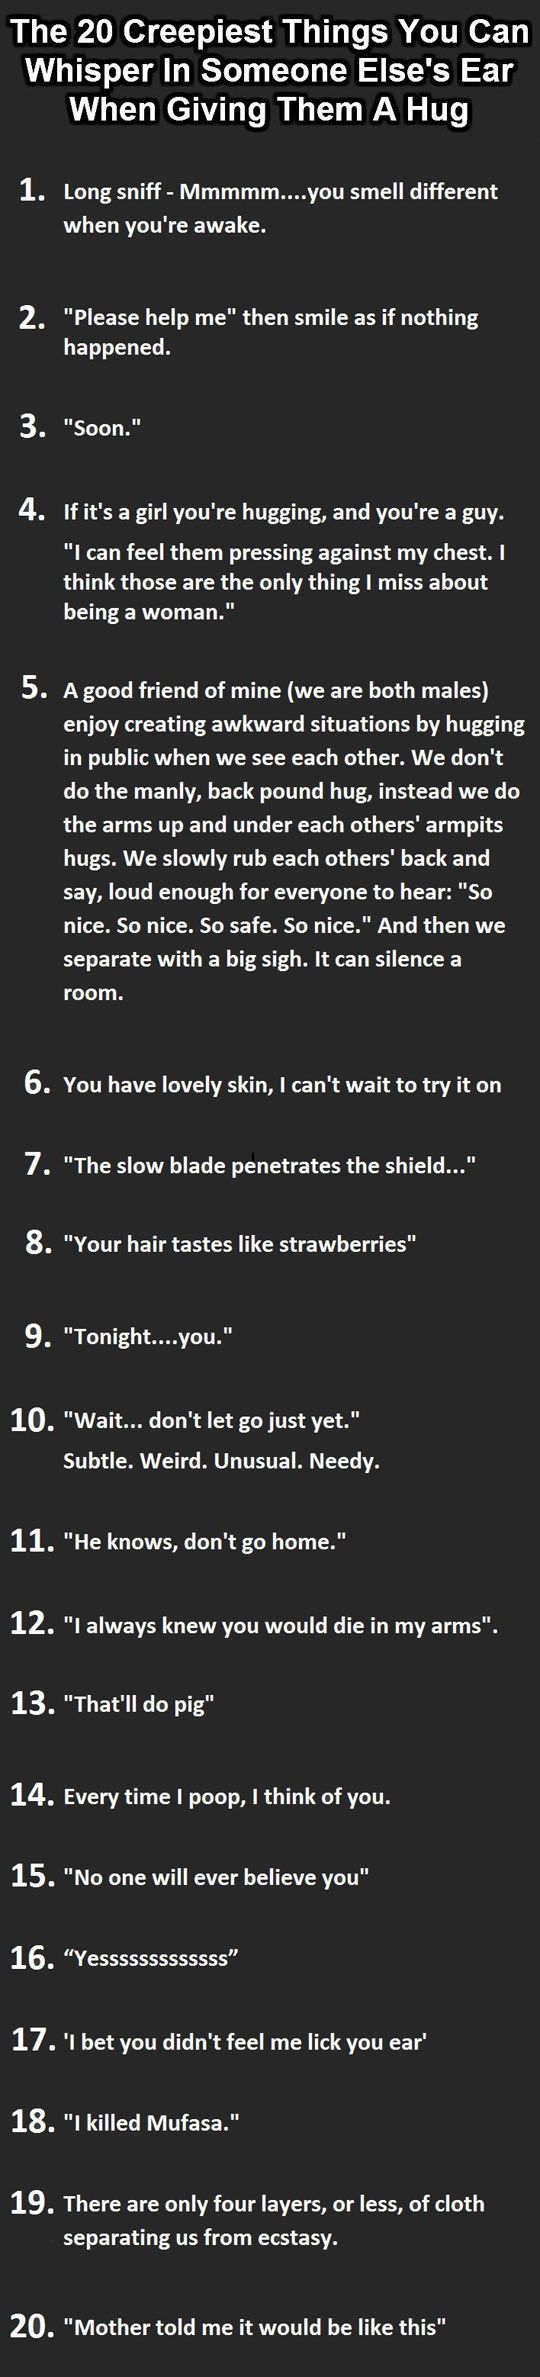 20 Creepiest Things You Can Whisper In Someone's Ear When Giving Them A ...